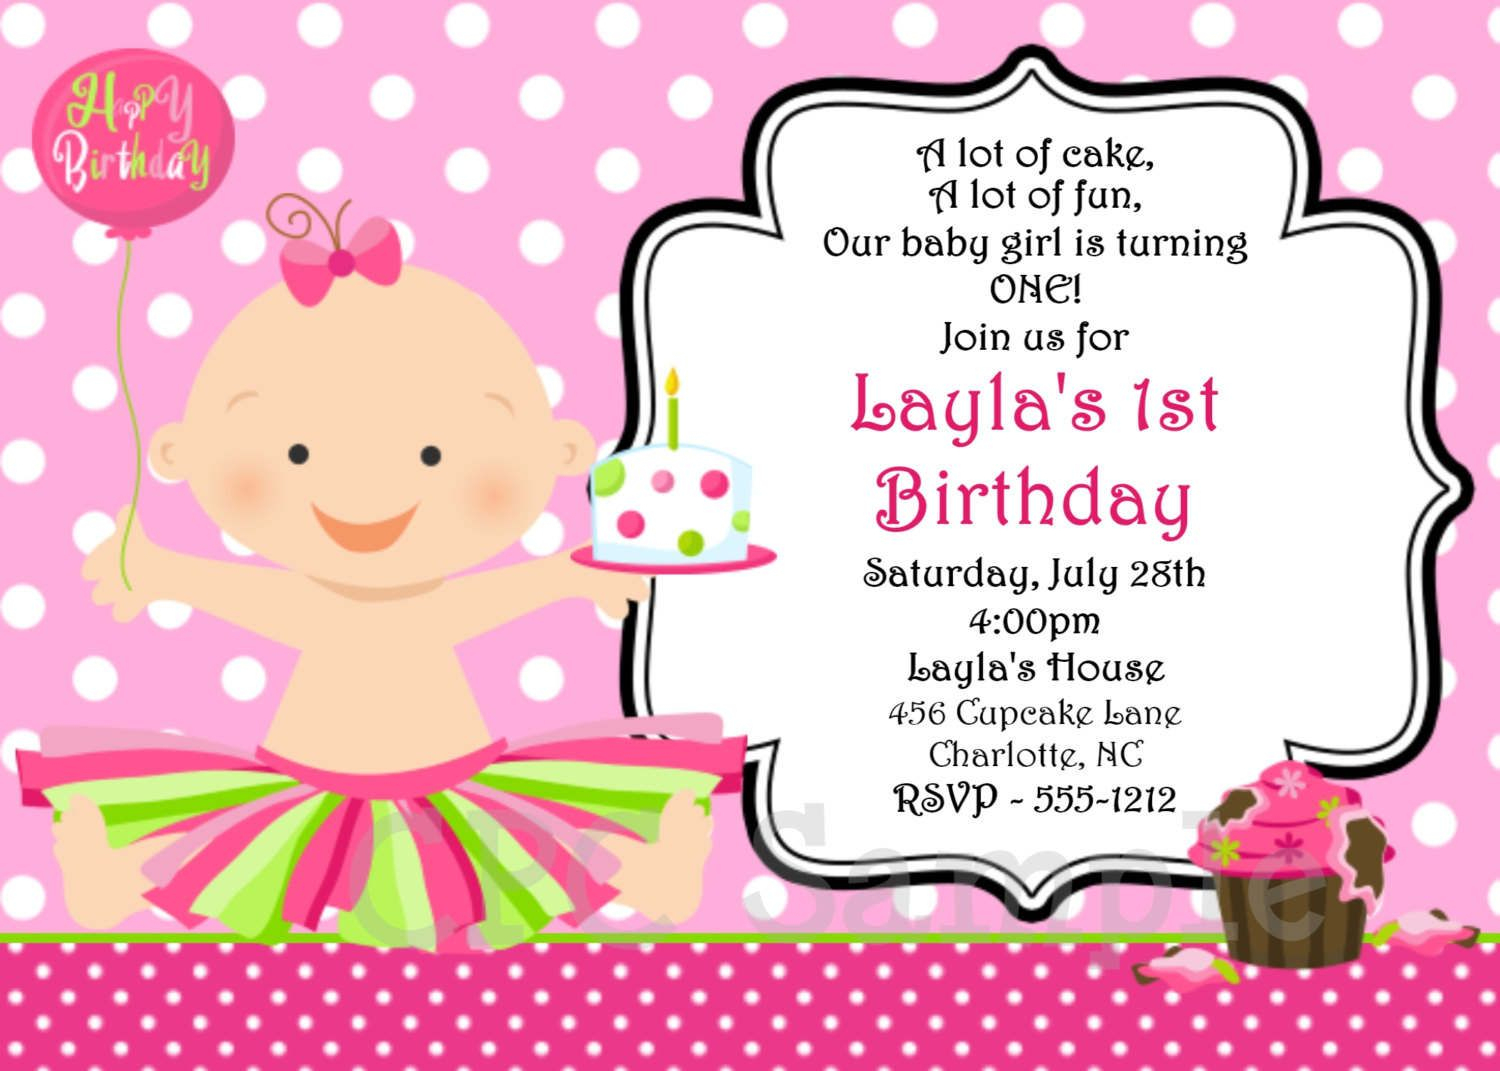 Birthday Invites Free Birthday Invitation Maker Images Downloads - Make Your Own Printable Birthday Cards Online Free